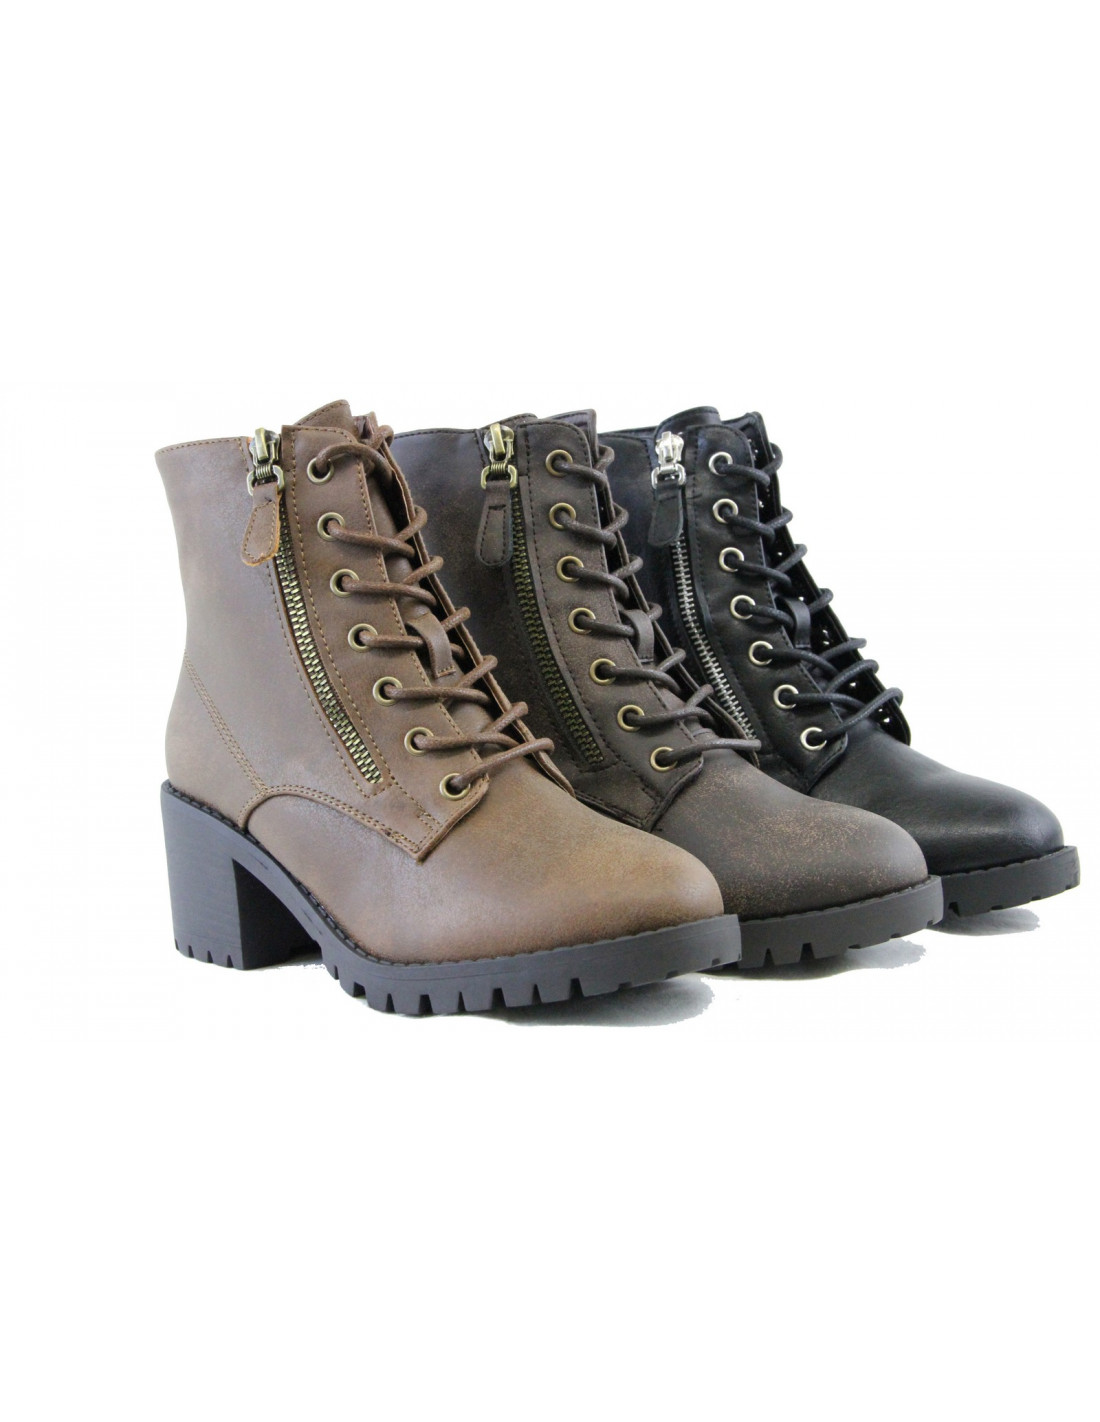 Womens Lace Up Block Heel Ankle Boots Shoes